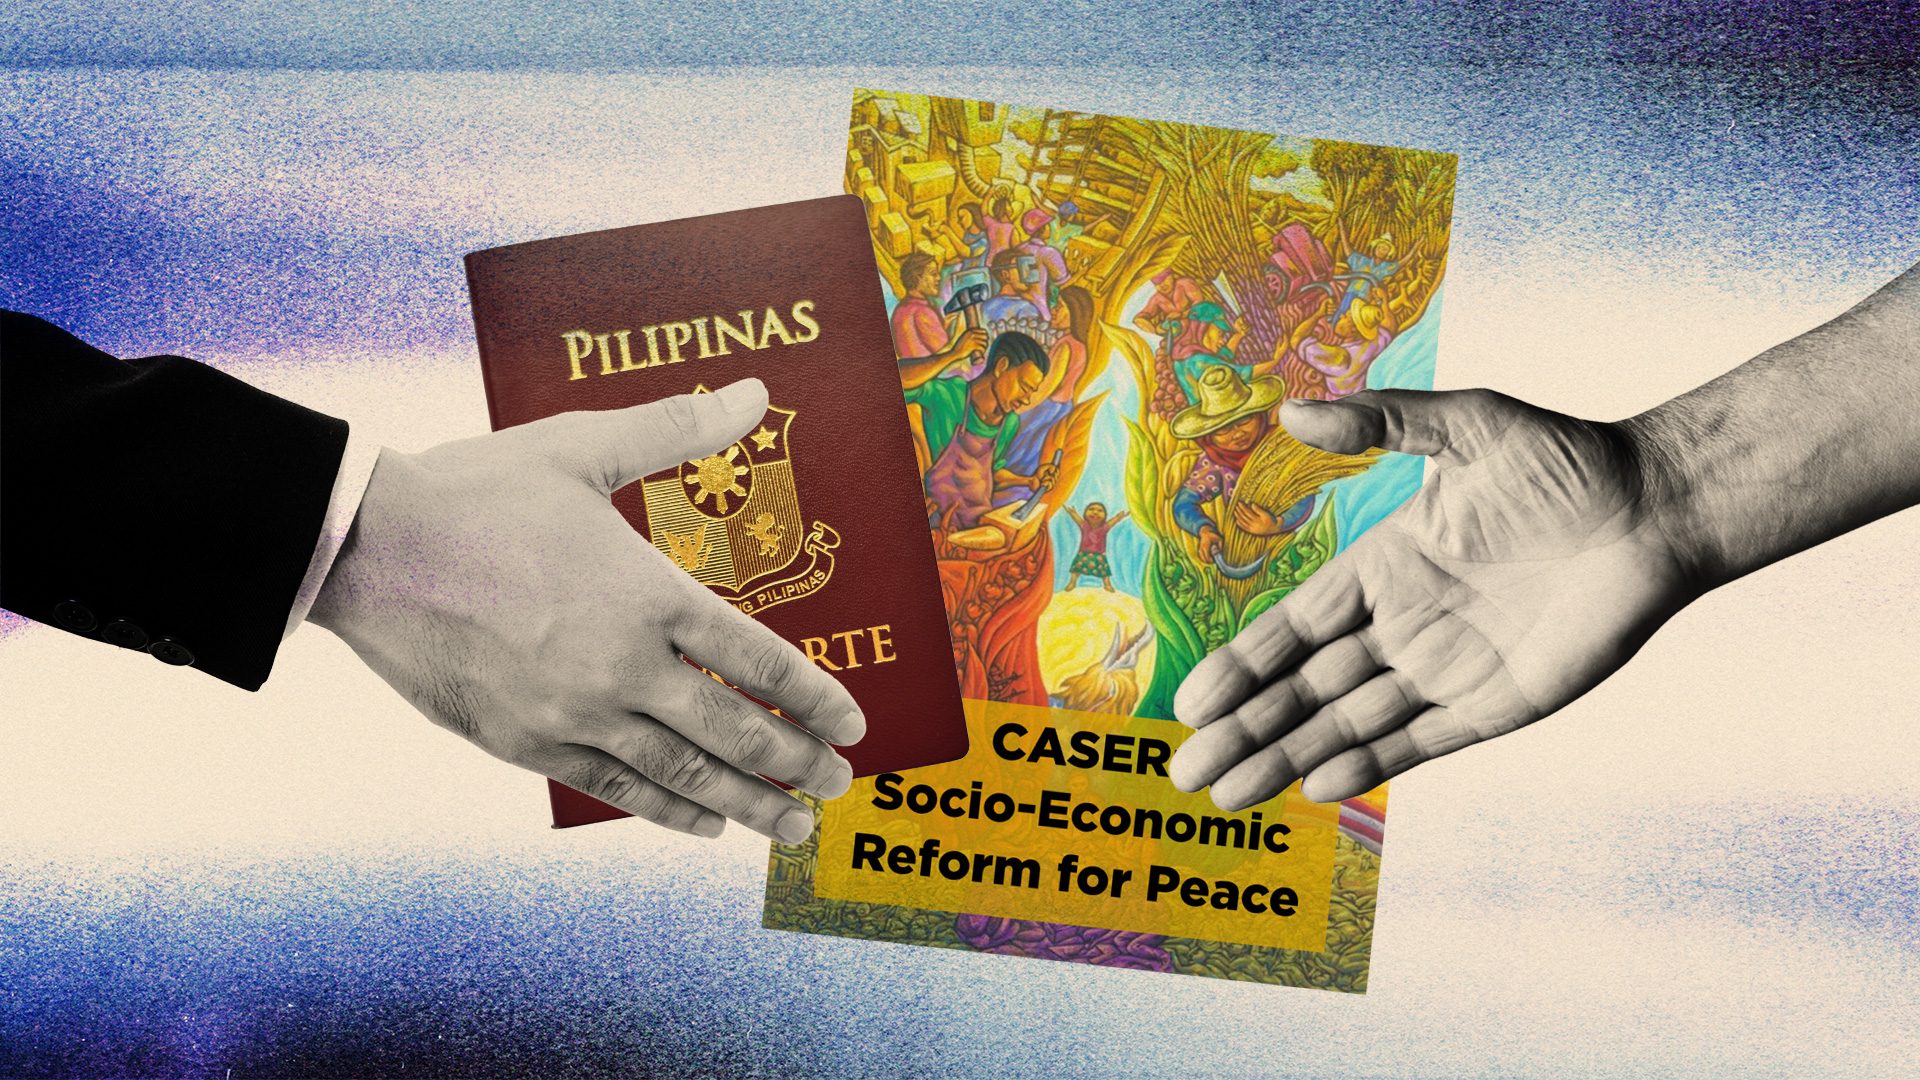 [New School] Is CASER the solution to the CPP-NPA?